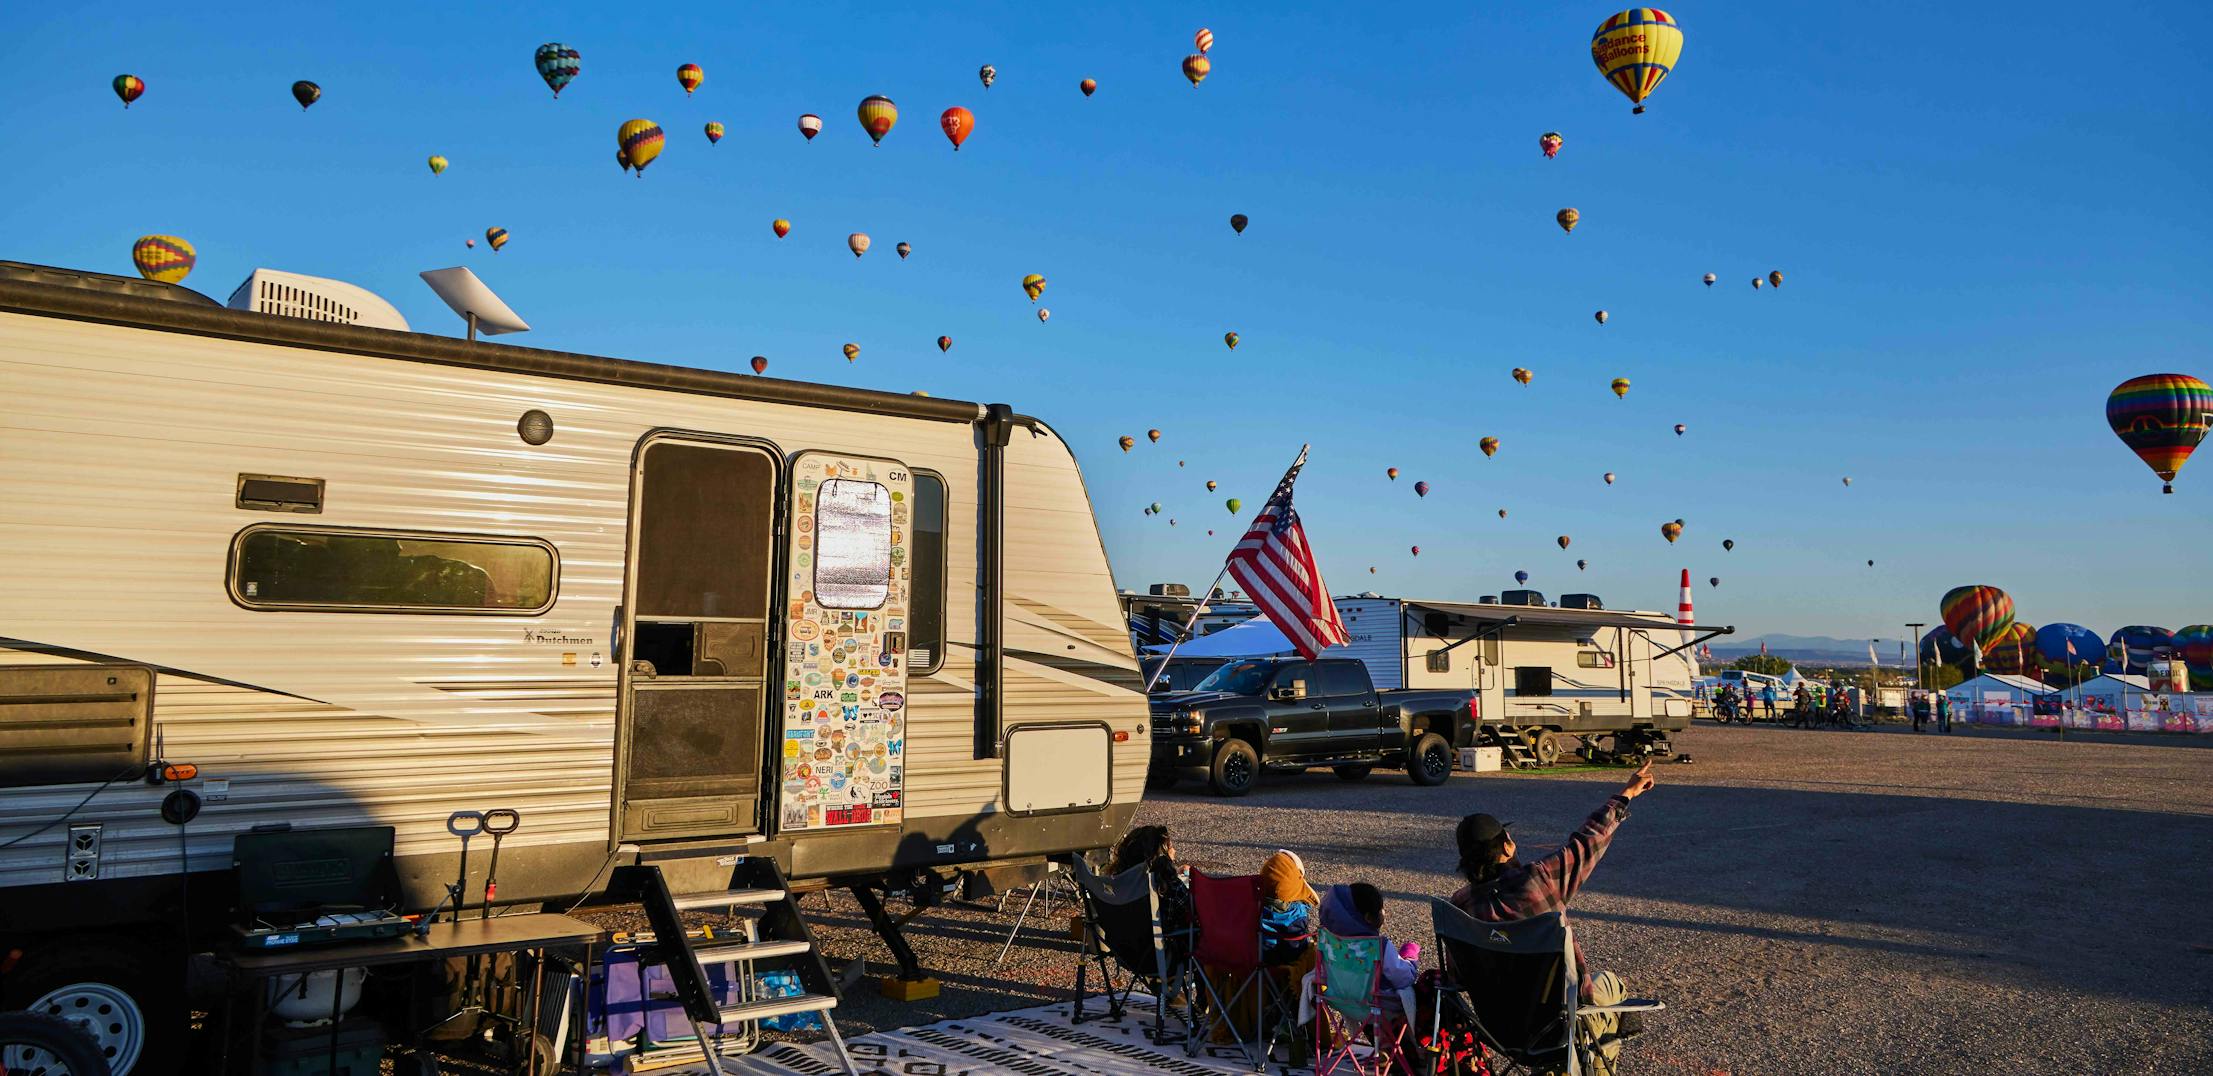 The Brian and Surna Barton family sitting at their campsite with their Coleman Travel Trailer while looking at hot air balloons at the Albuquerque Balloon Fiesta